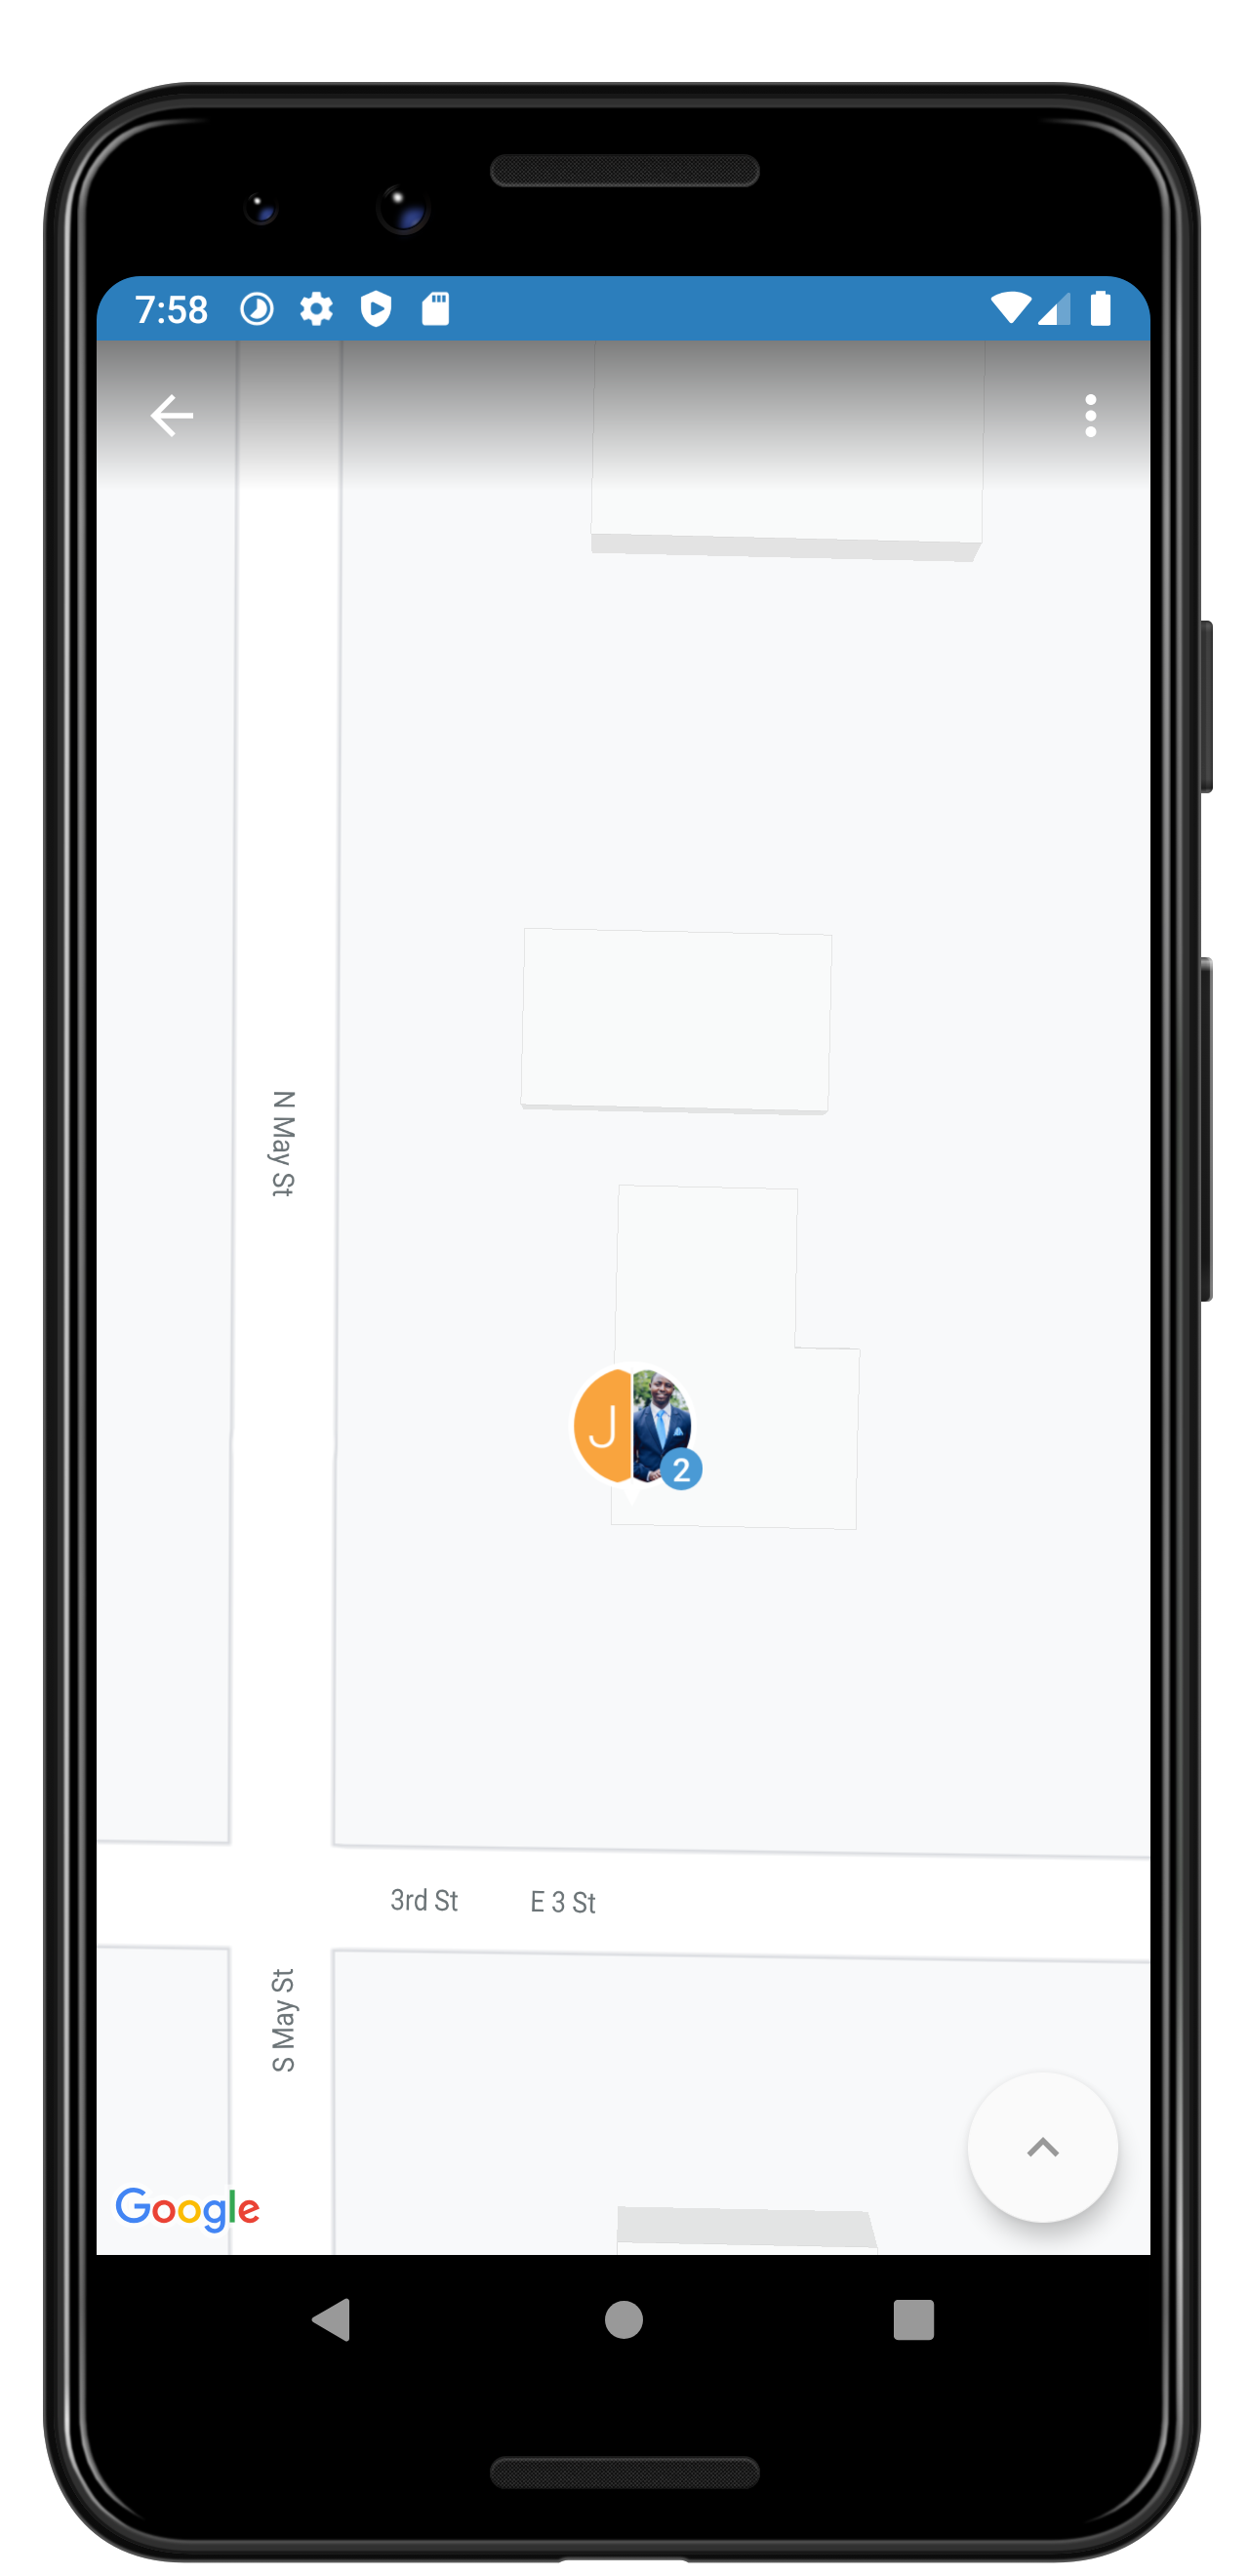 Stay organized with worker location tracking